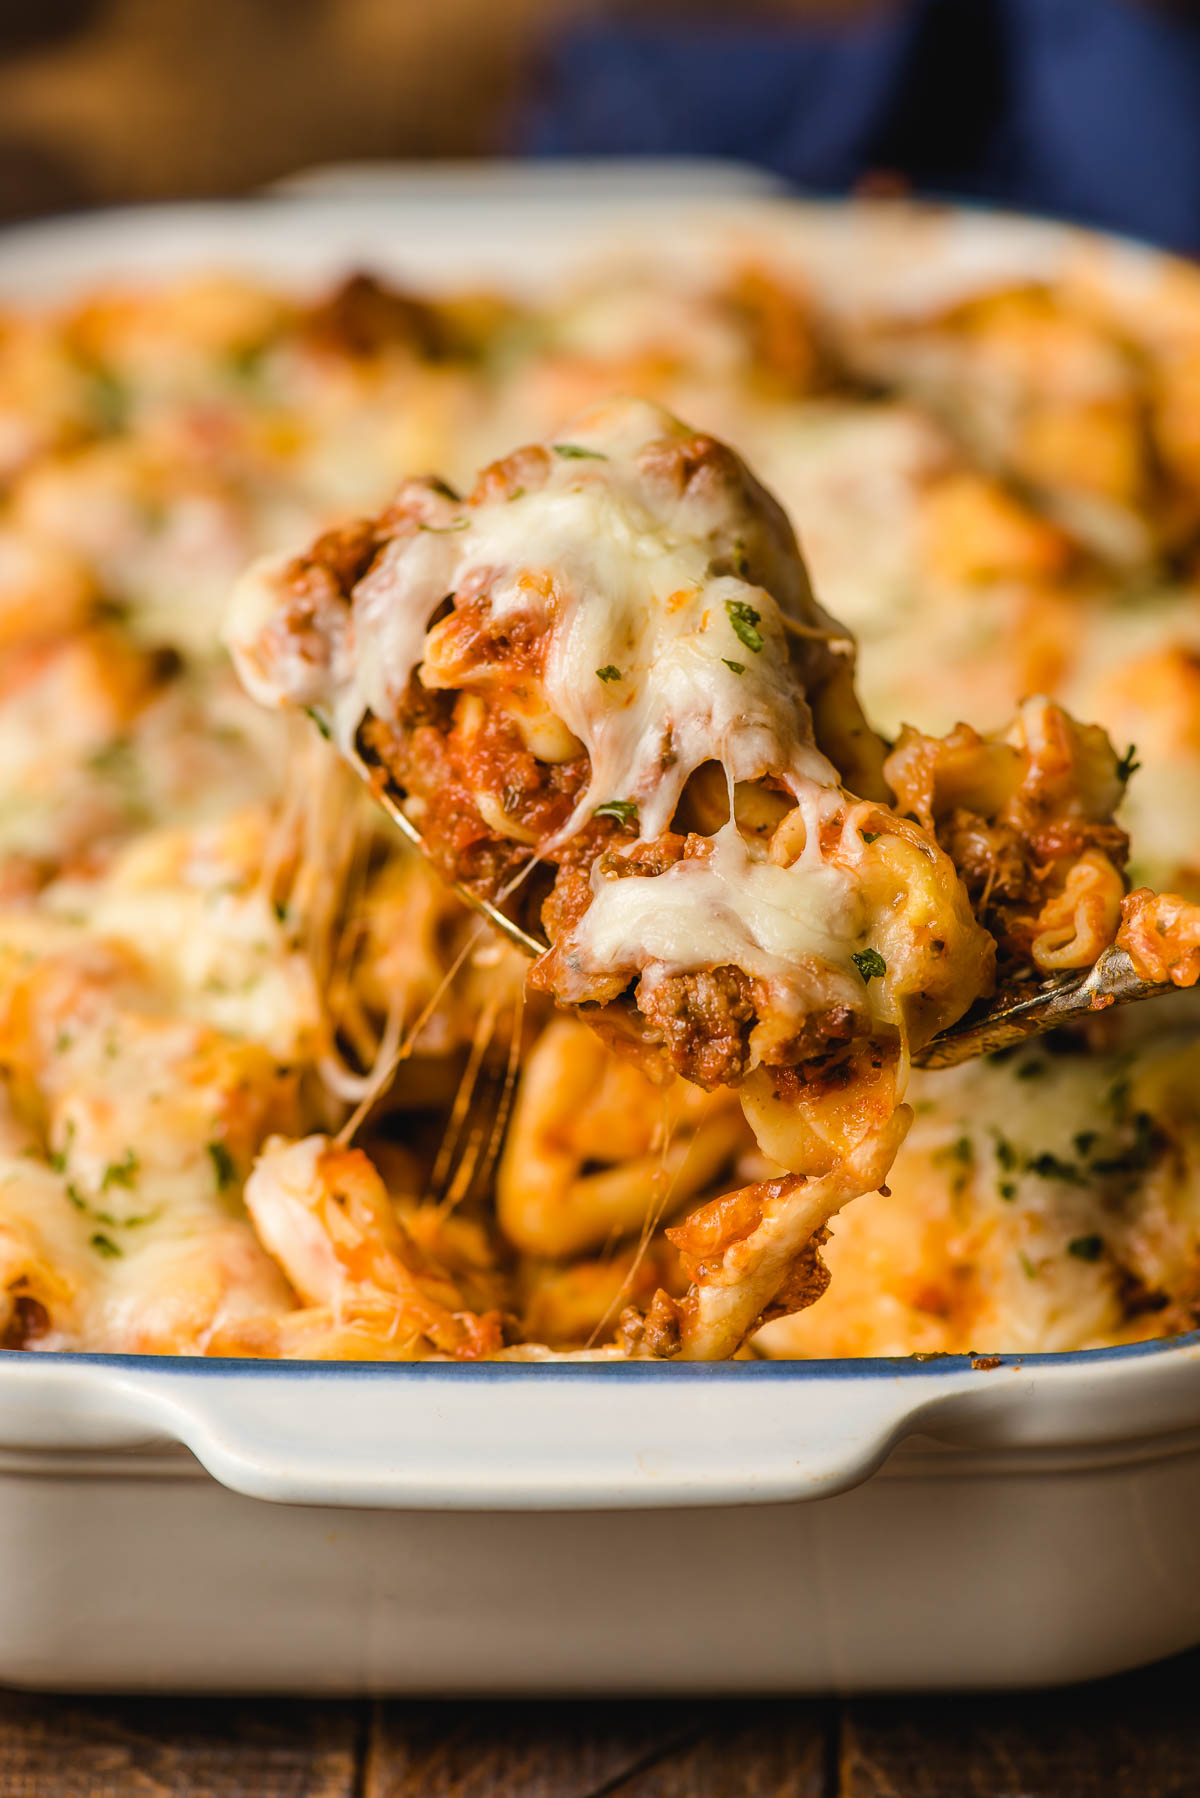 Cheesy tortellini bake in a serving spoon over a casserole dish.